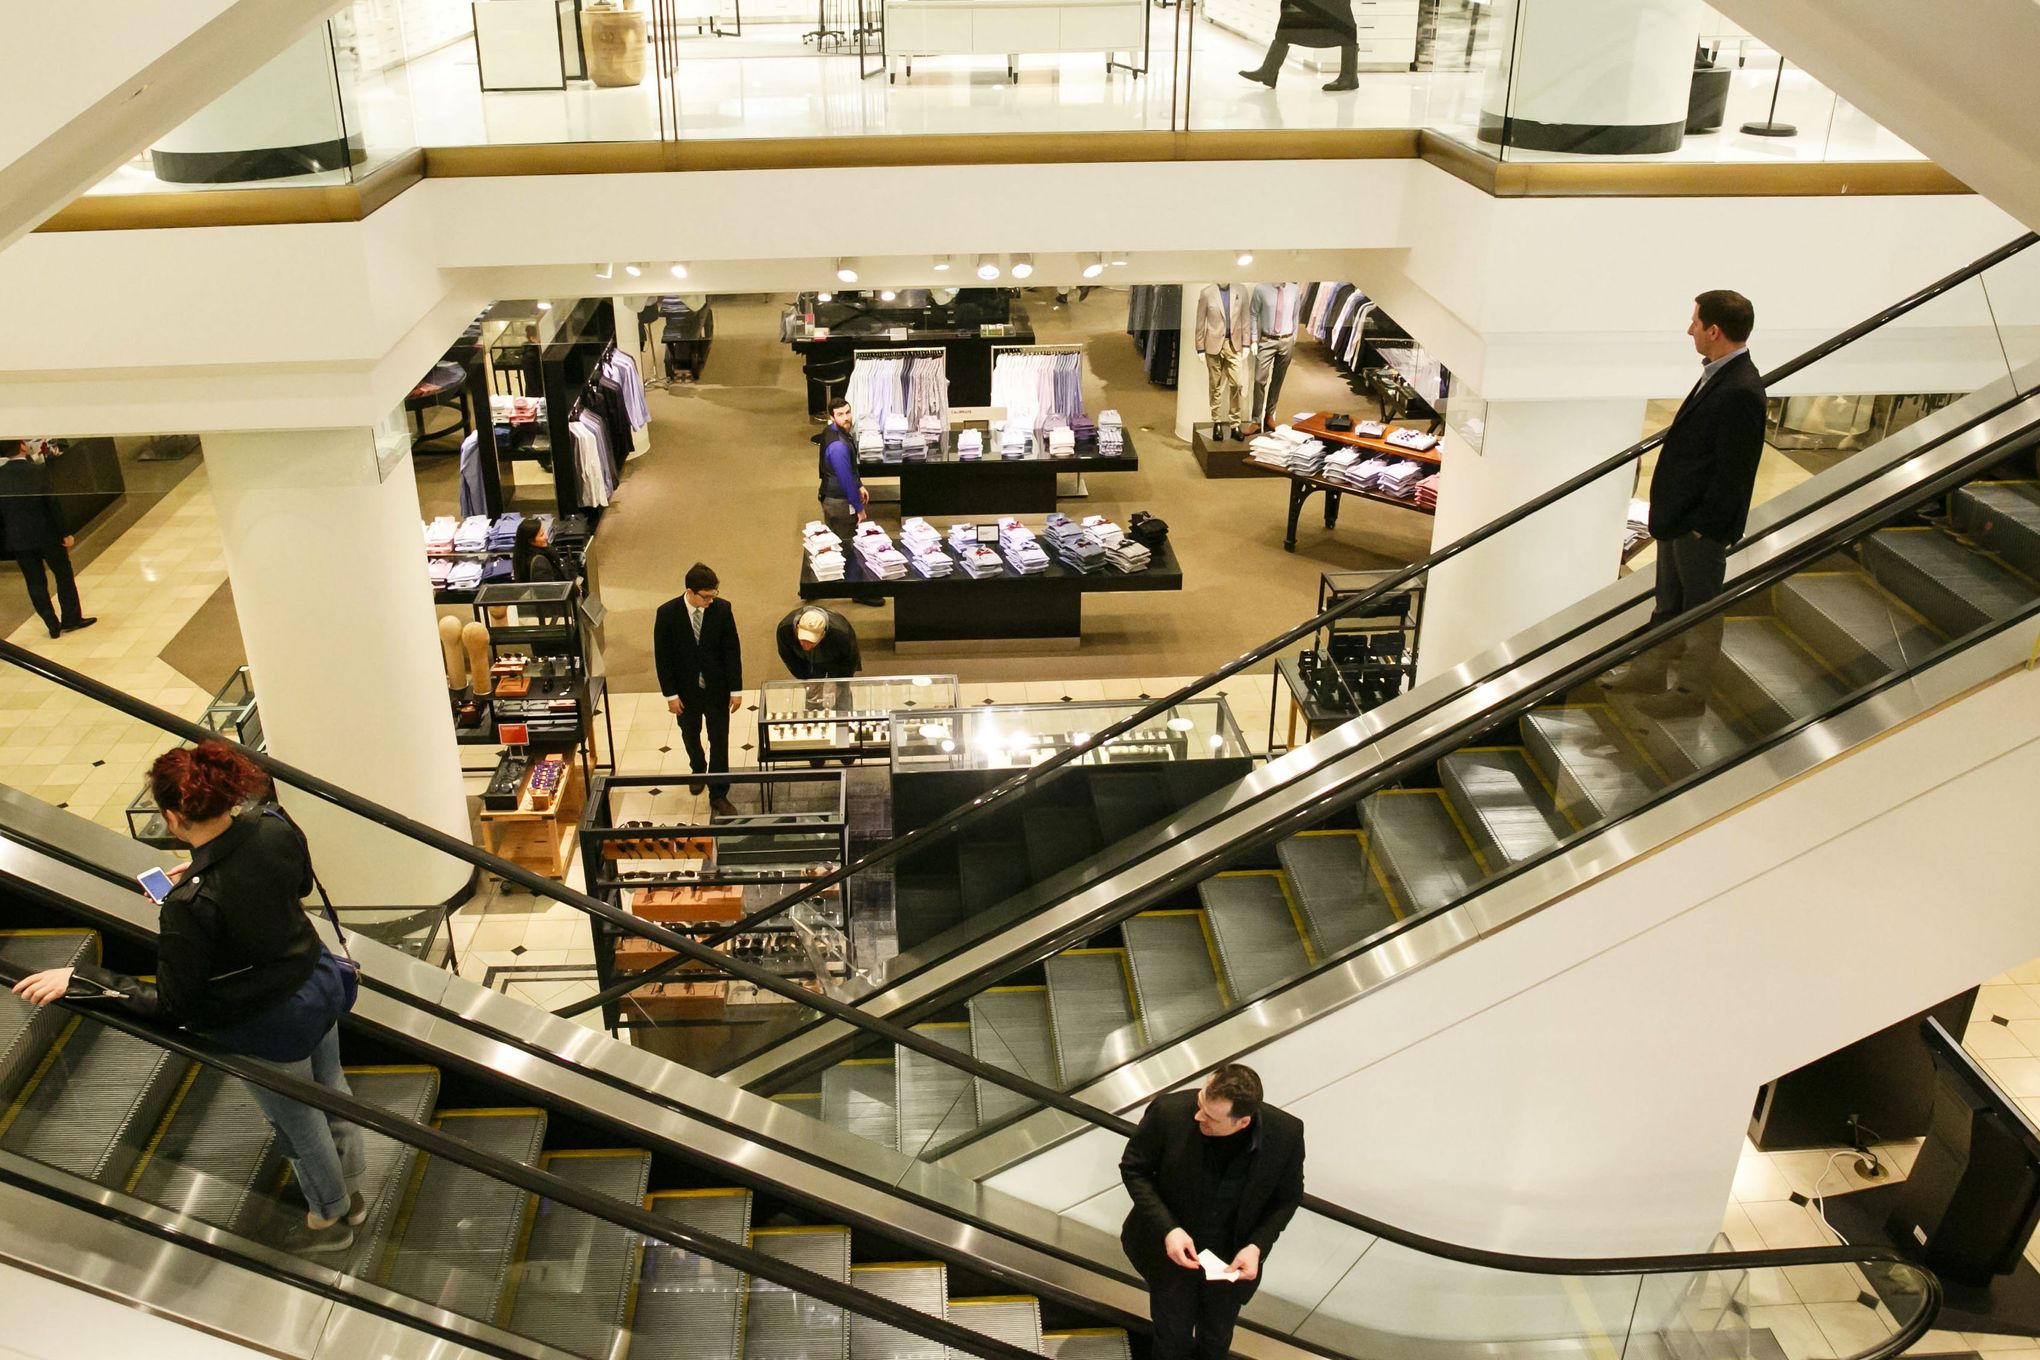 Nordstrom expected to lure more high-end stores - Nashville Business Journal